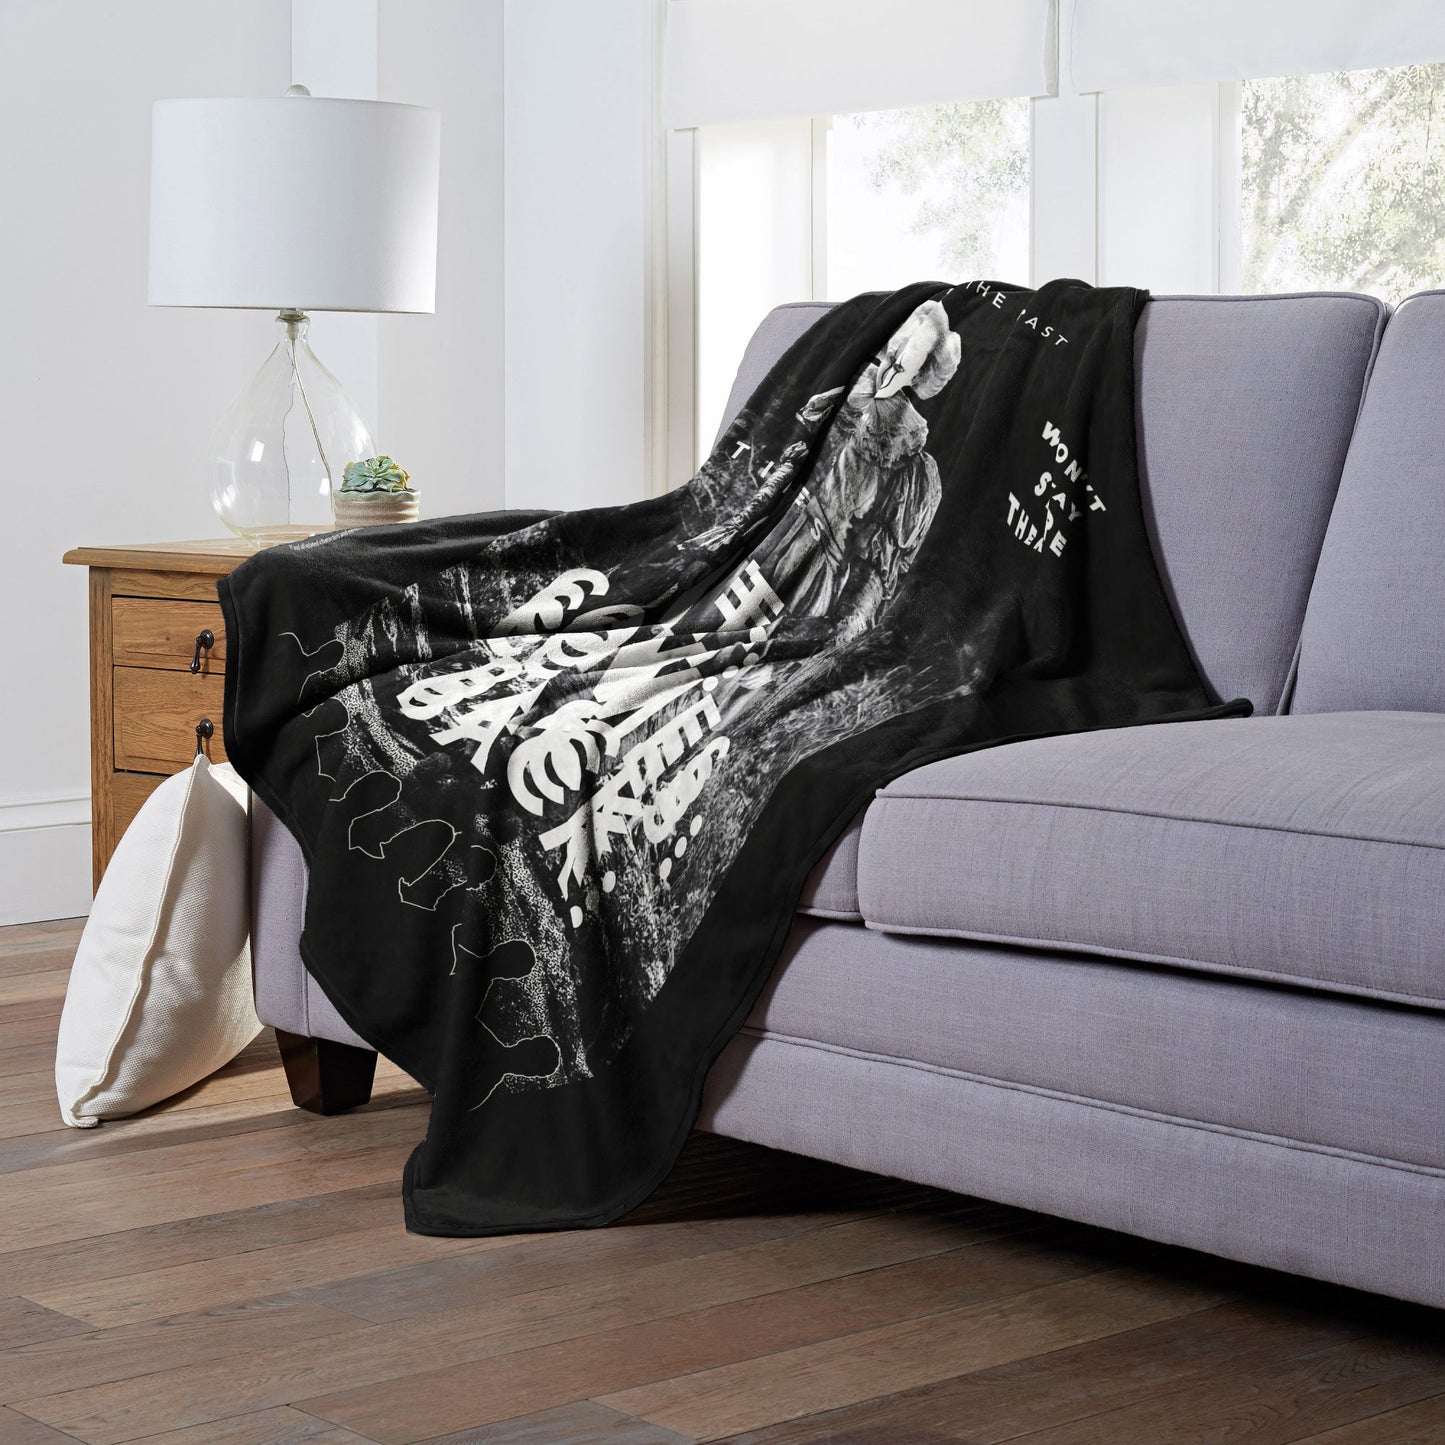 IT 2 It Comes Back Throw Blanket 50"x60"